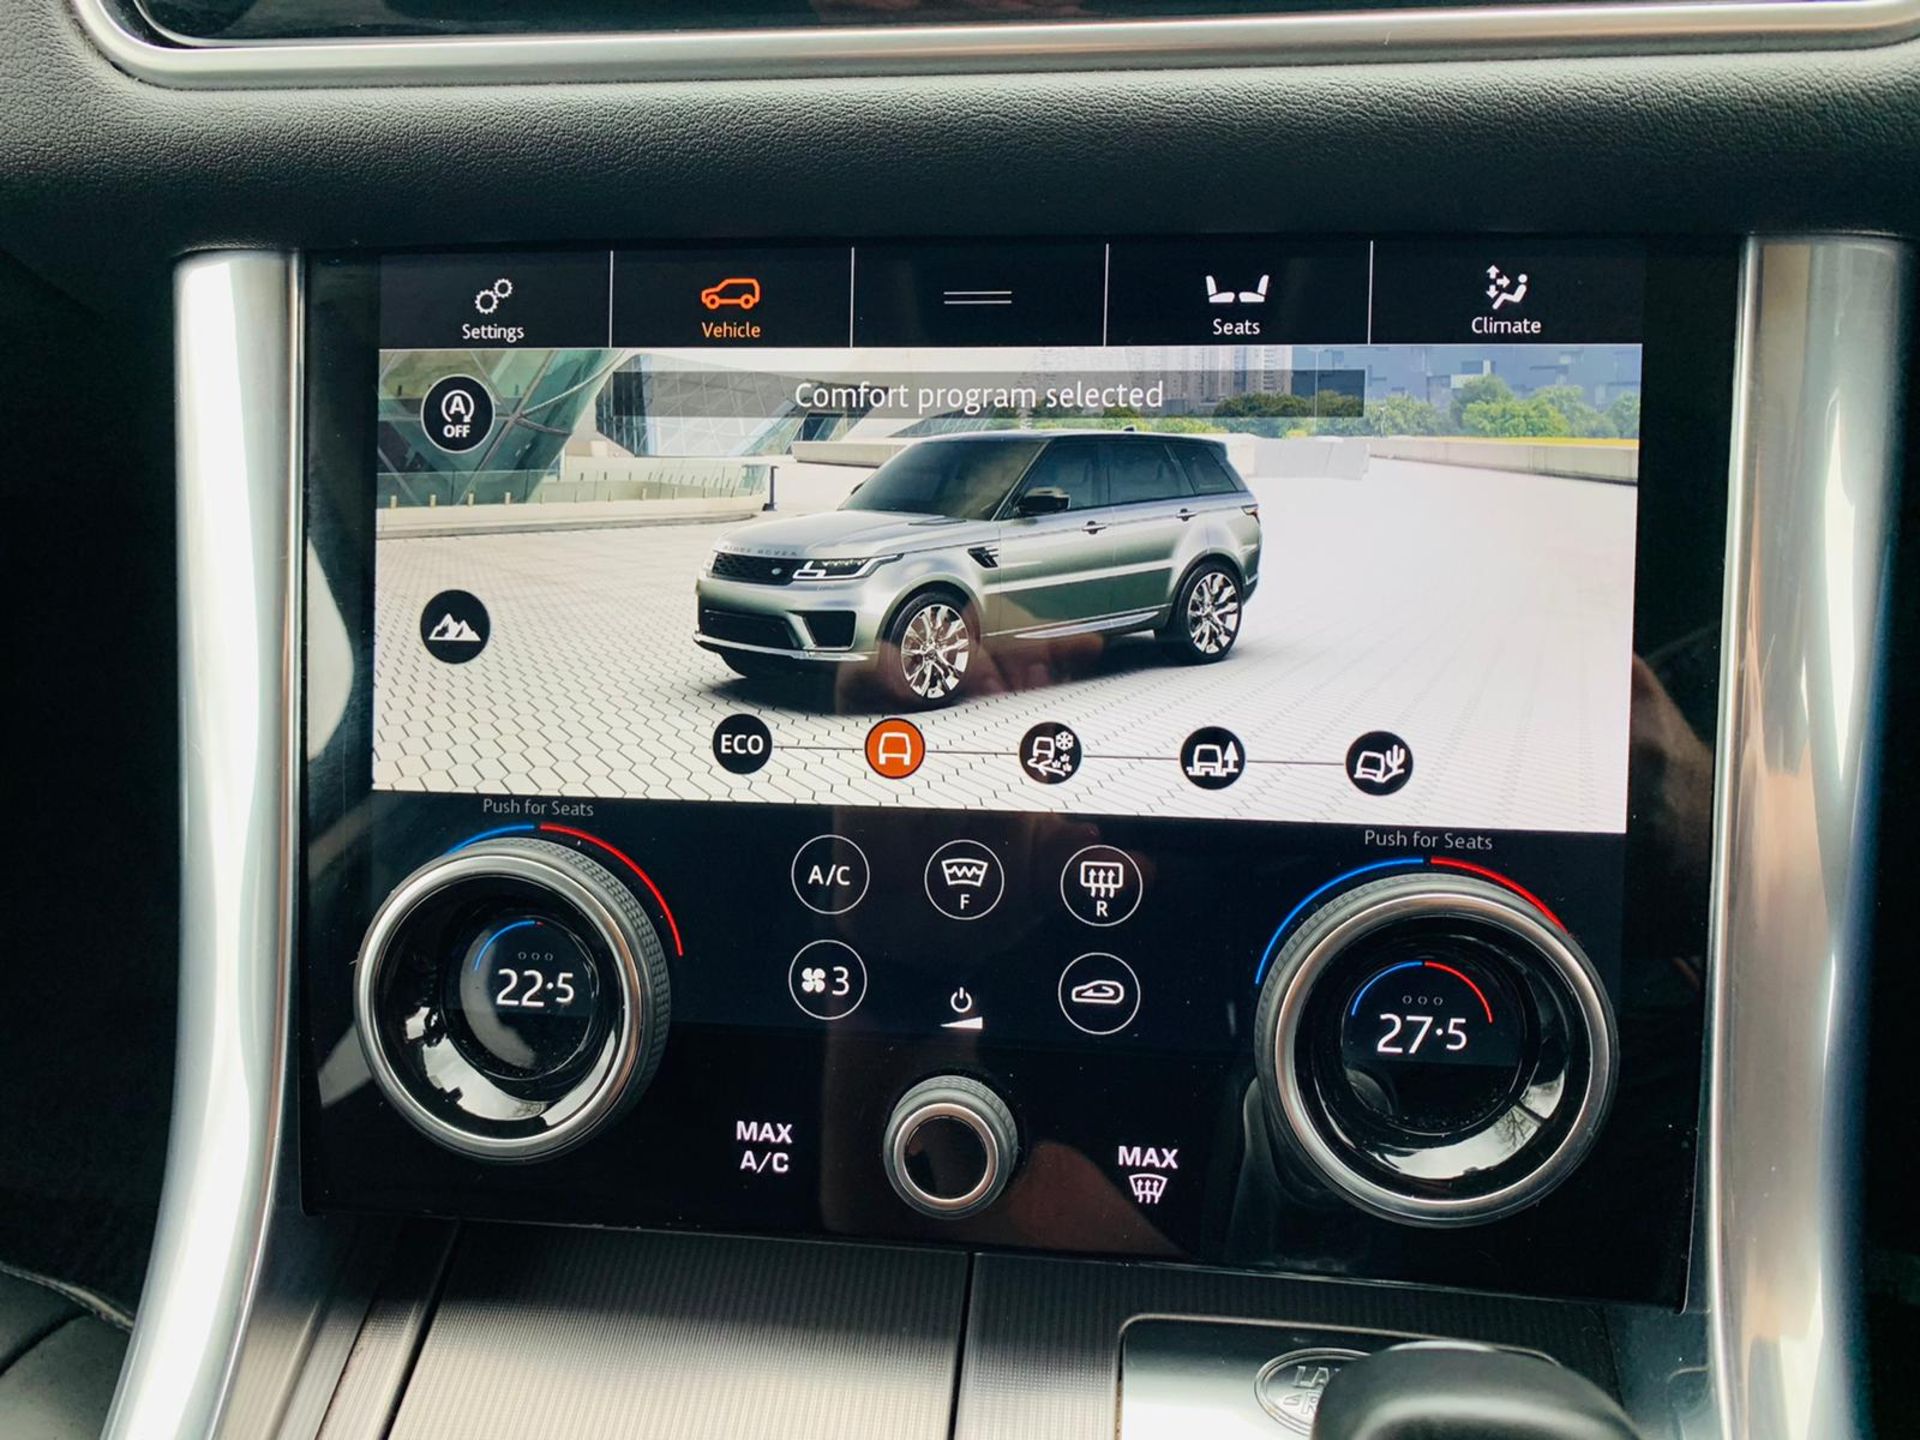 Range Rover Sport 3.0 SDV6 HSE Auto - 2019 - 1 Keeper From New - Virtual Cockpit - - Image 17 of 42